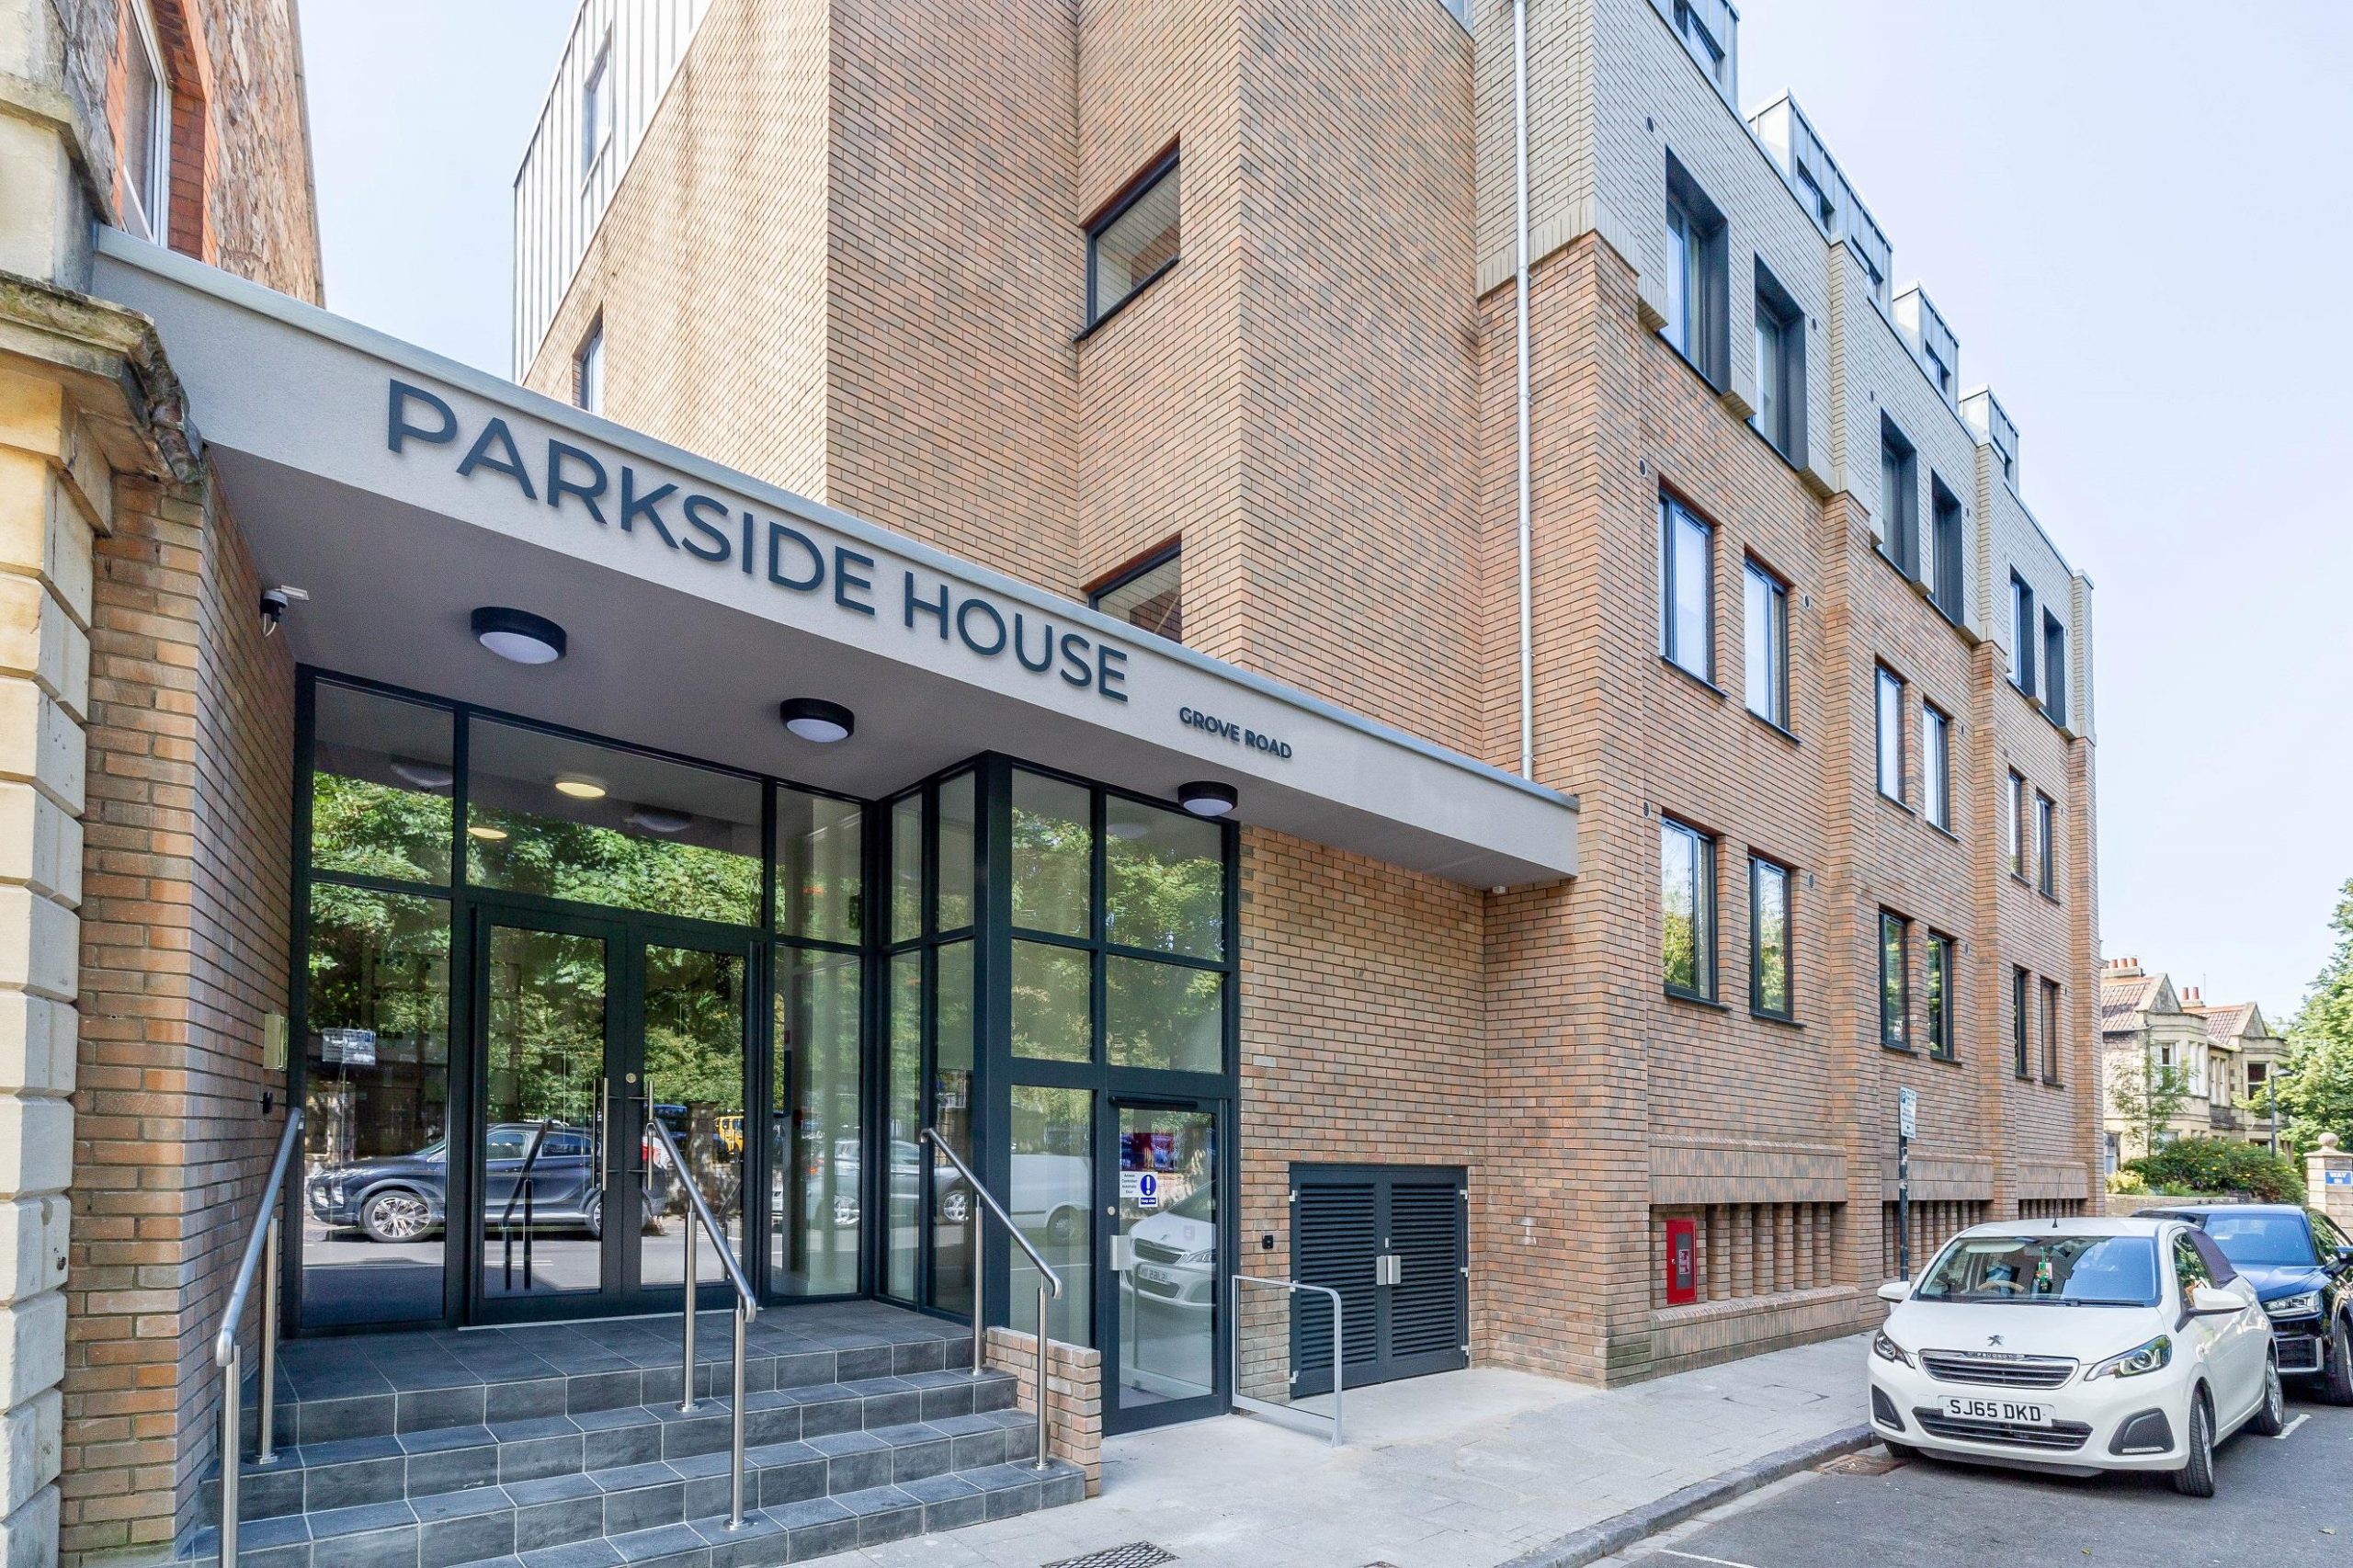 University degree student accommodation Parkside house in Weston-super-Mare North Somerset